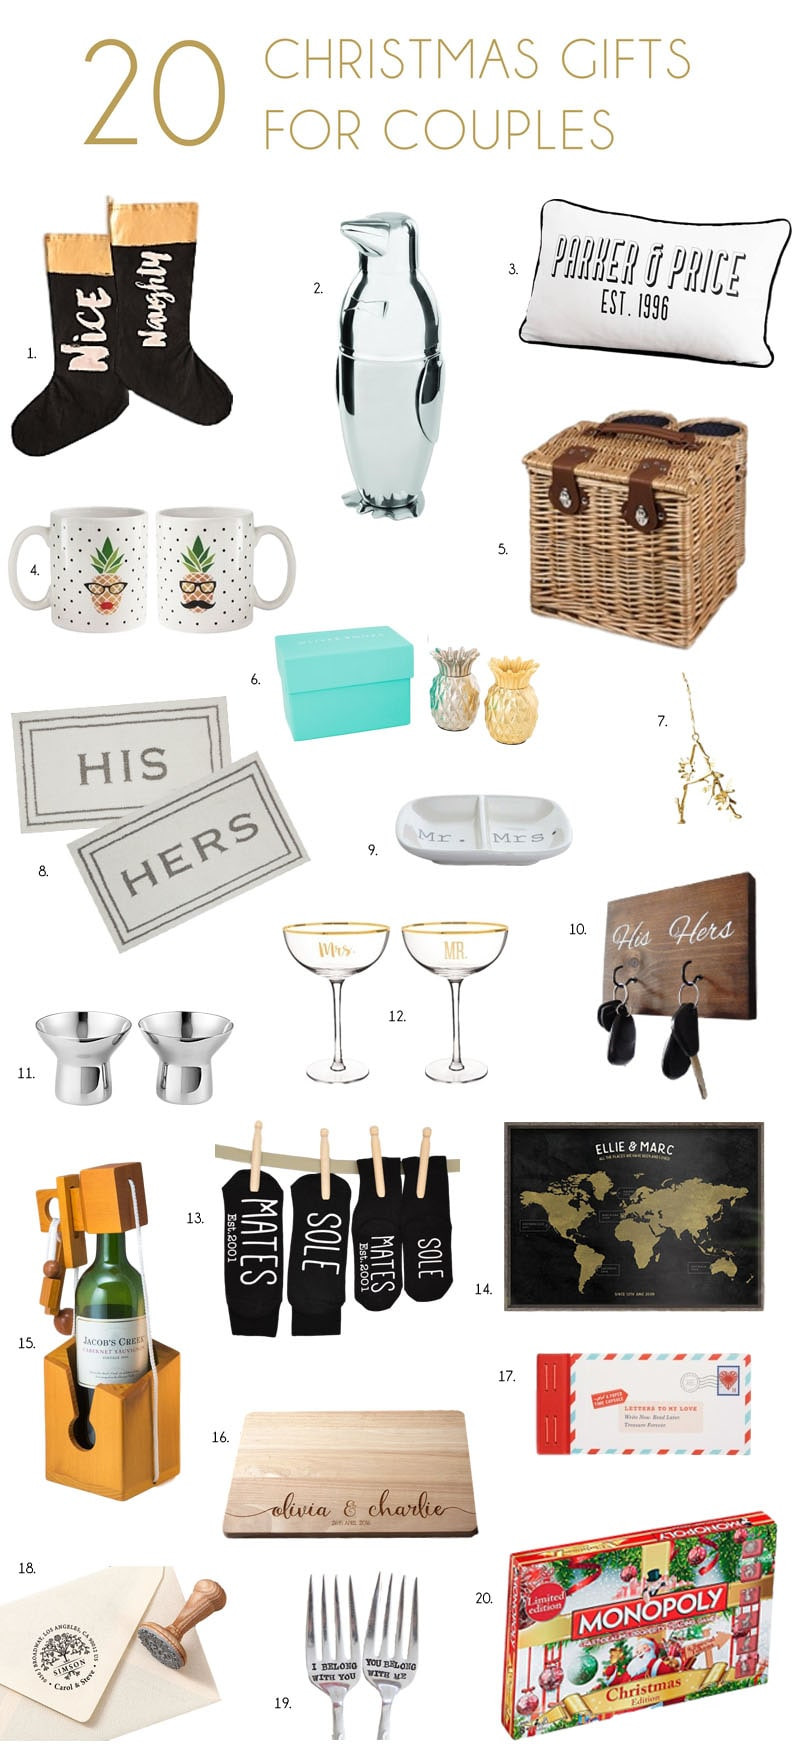 Christmas Gift Ideas For Older Couple
 His n Hers Christmas Gifts for Couples